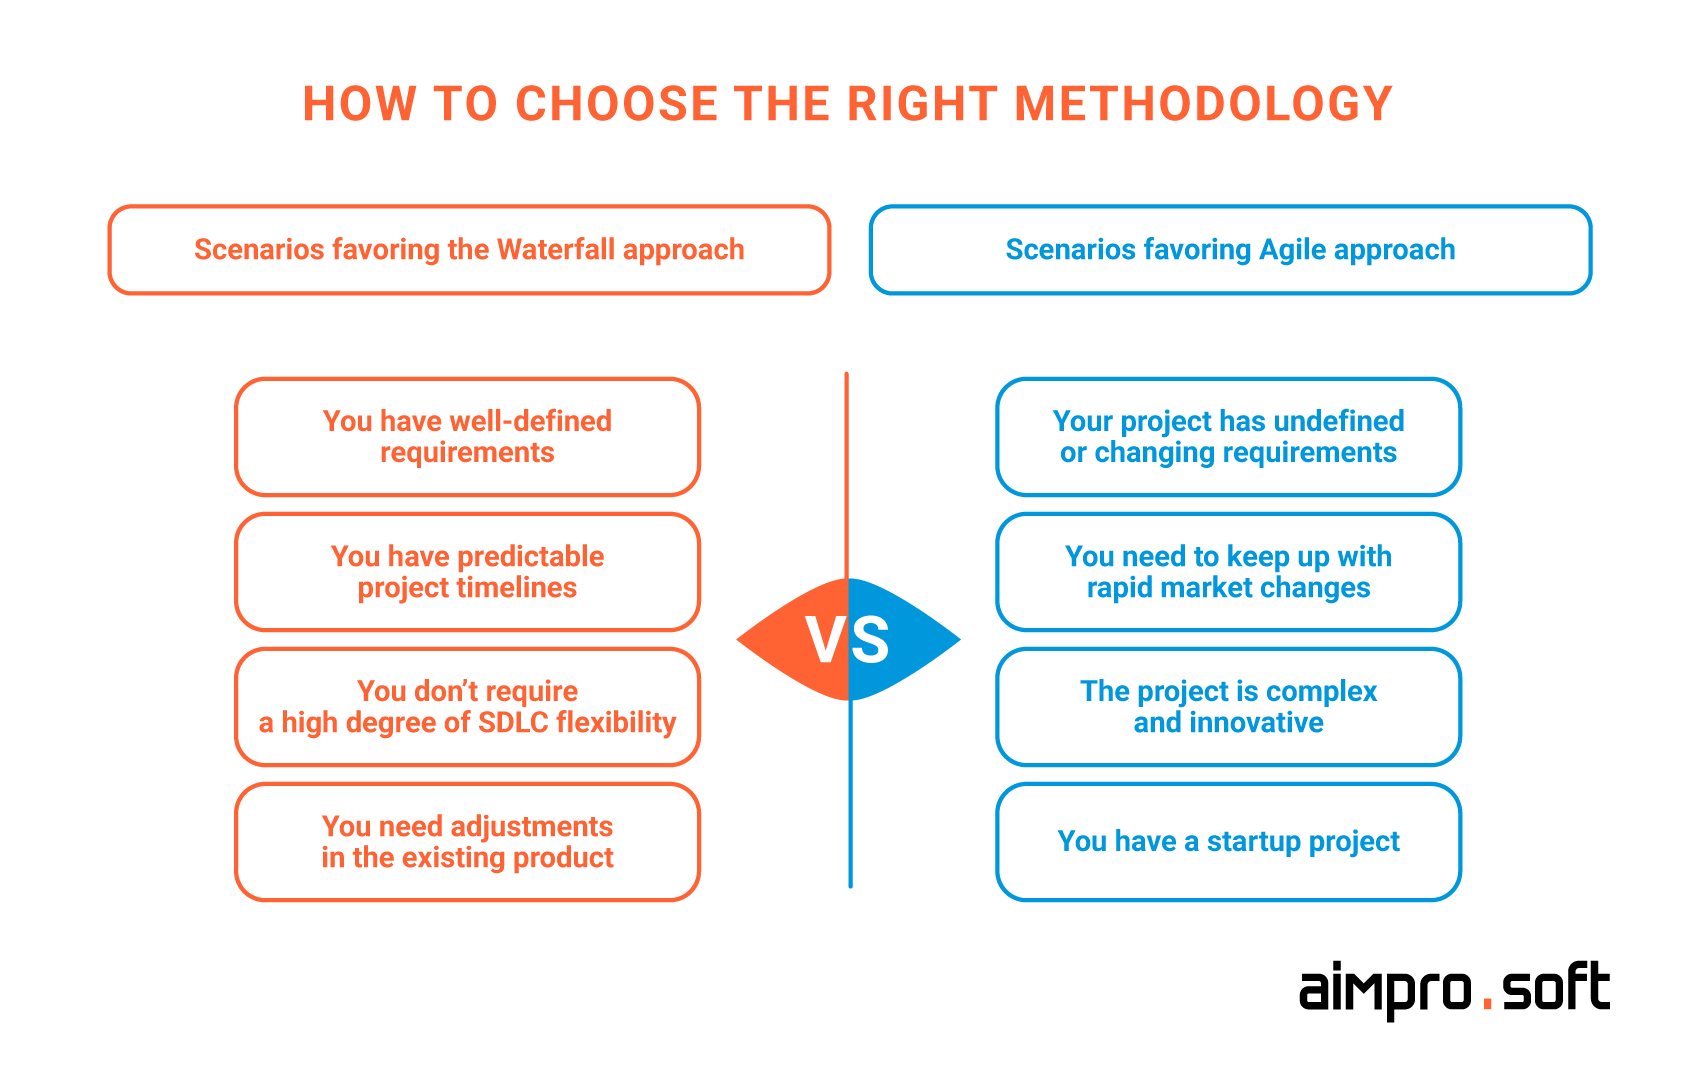 How to choose the right methodology